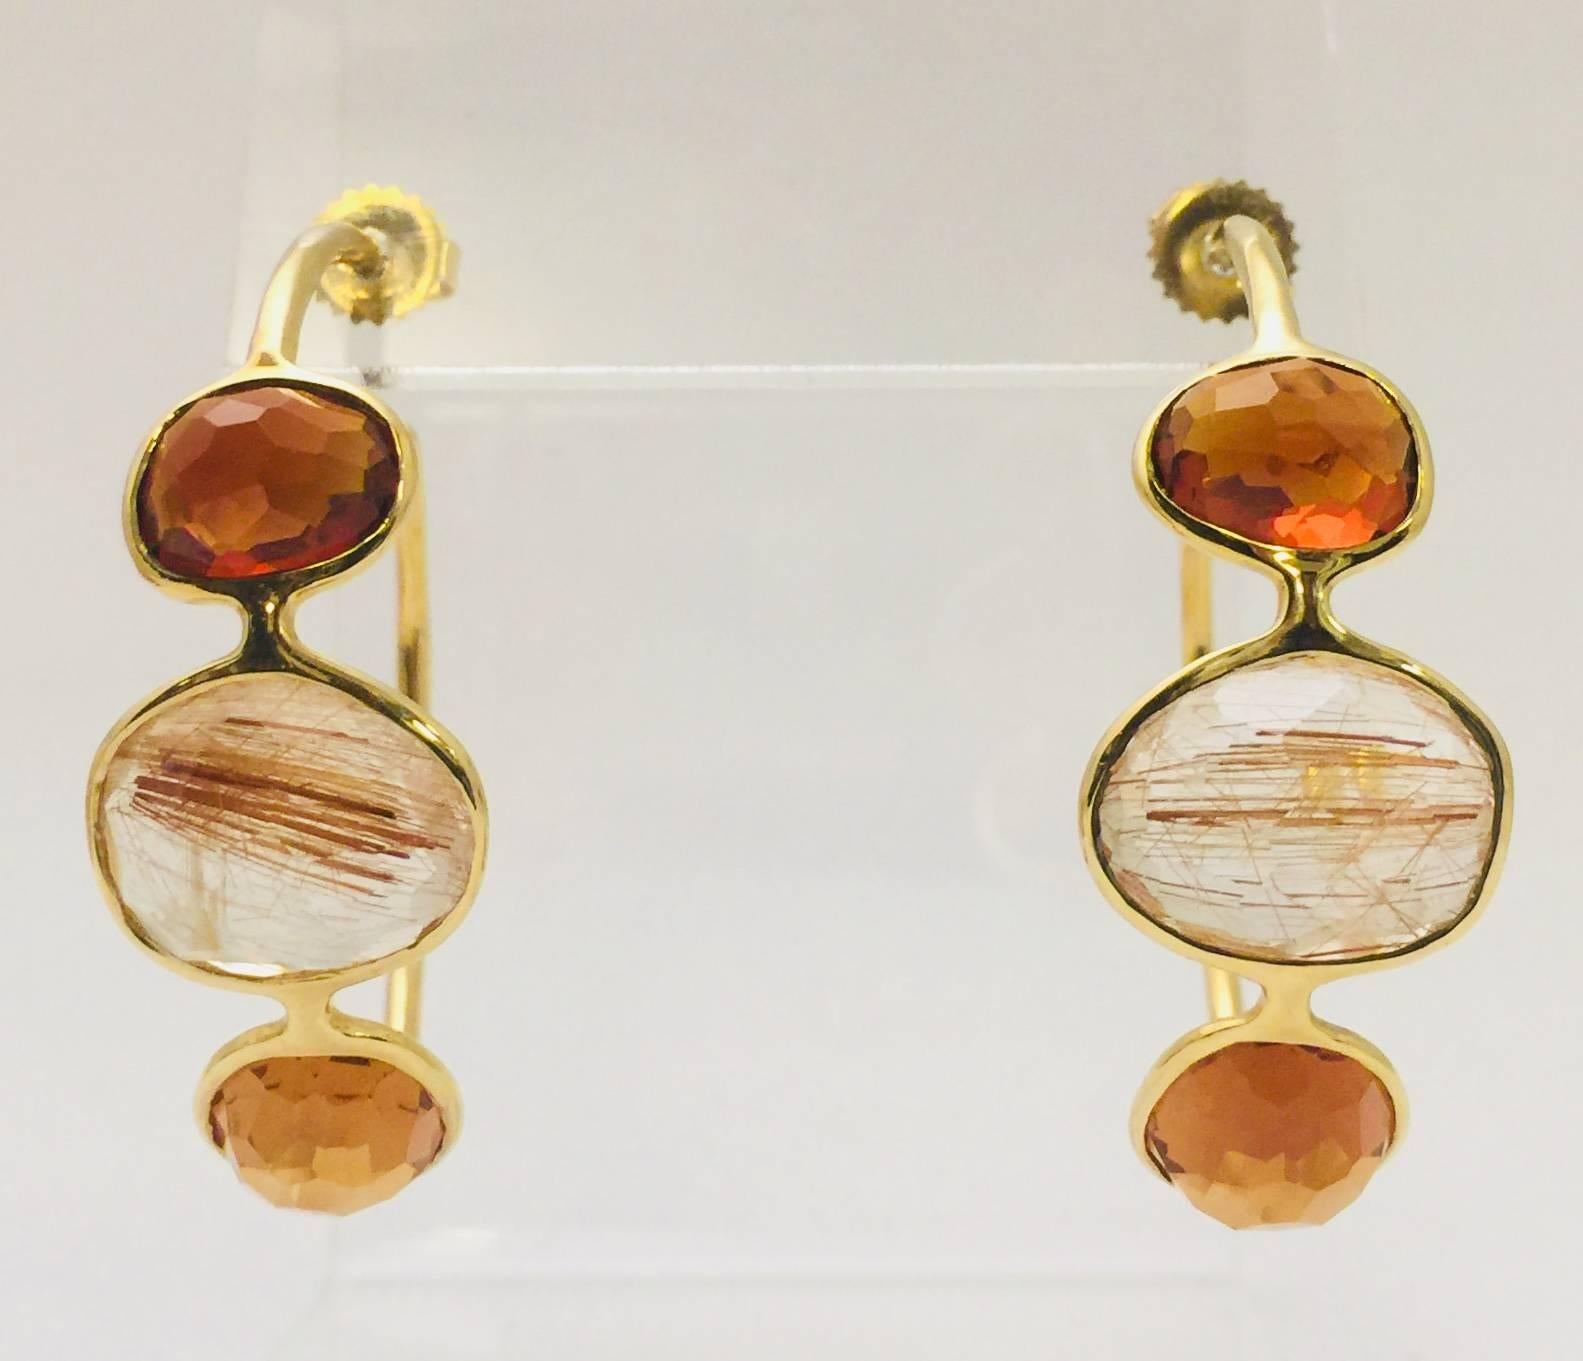 Rock Candy never looked so good!  Ippolita's signature rutilated stone jewelry has literally become a must for any up-and- coming fashionista or seasoned socialite!  These hoop earrings feature polished 18K yellow gold, faceted Quartz, and two